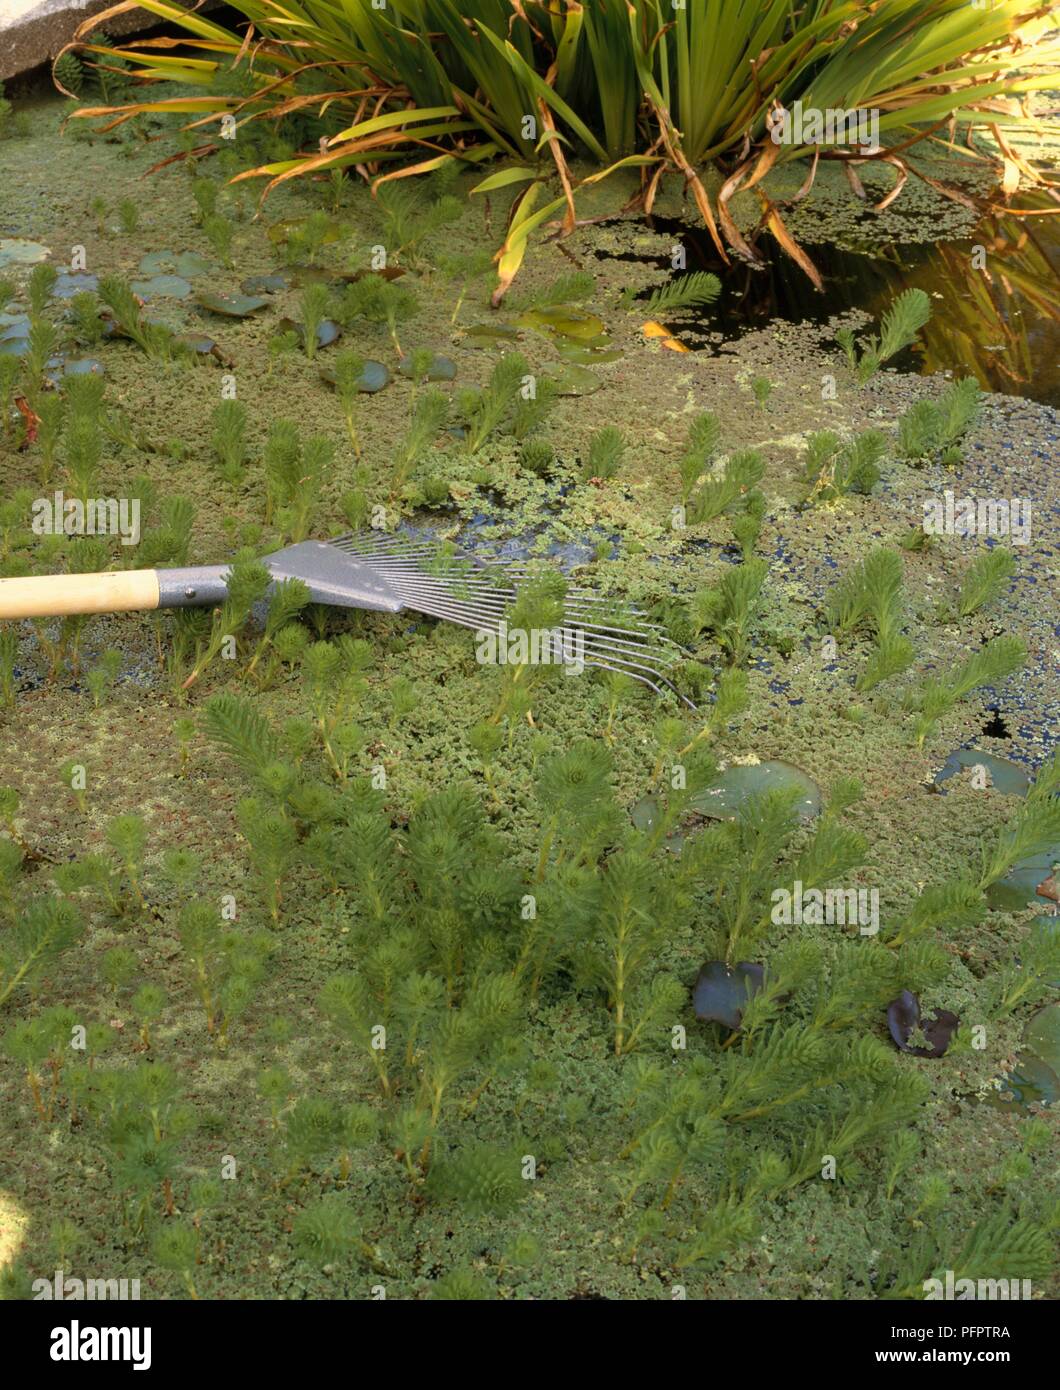 Removing weeds from surface of a pond using a rake Stock Photo